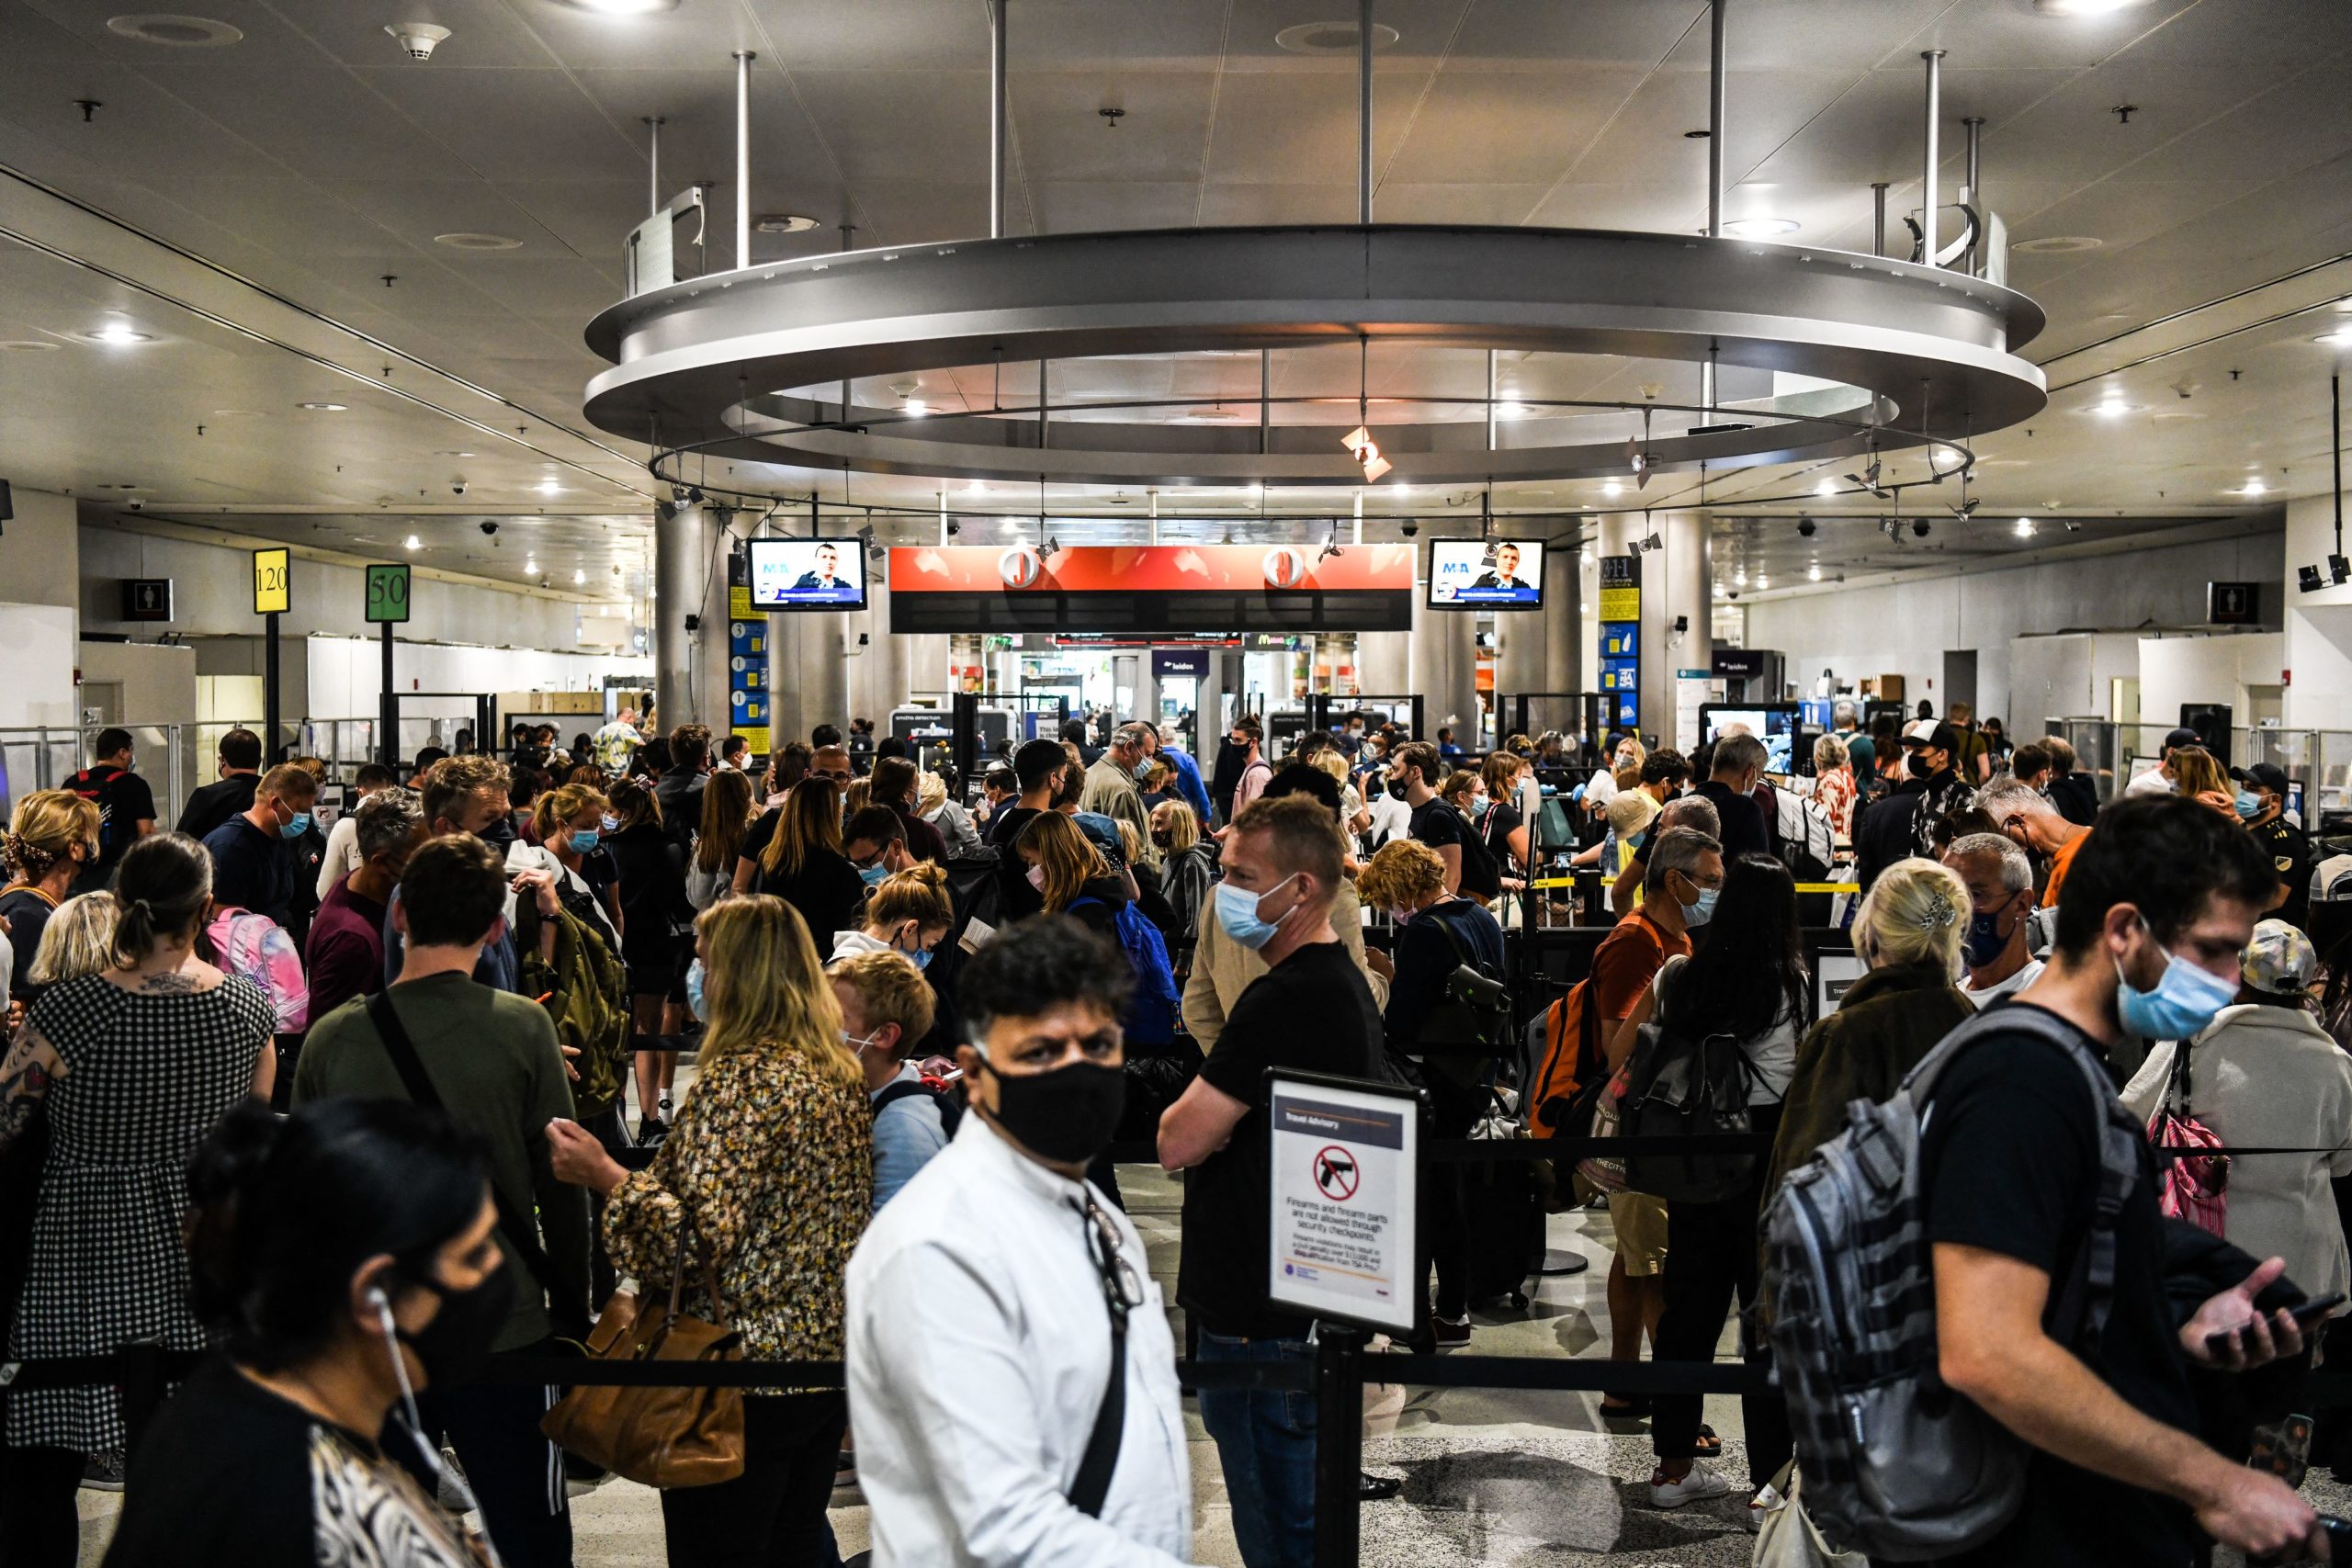 People wait for security check-in at the Miami International Airport in Miami, Florida on January 3, 2022. (Photo by CHANDAN KHANNA/AFP via Getty Images)